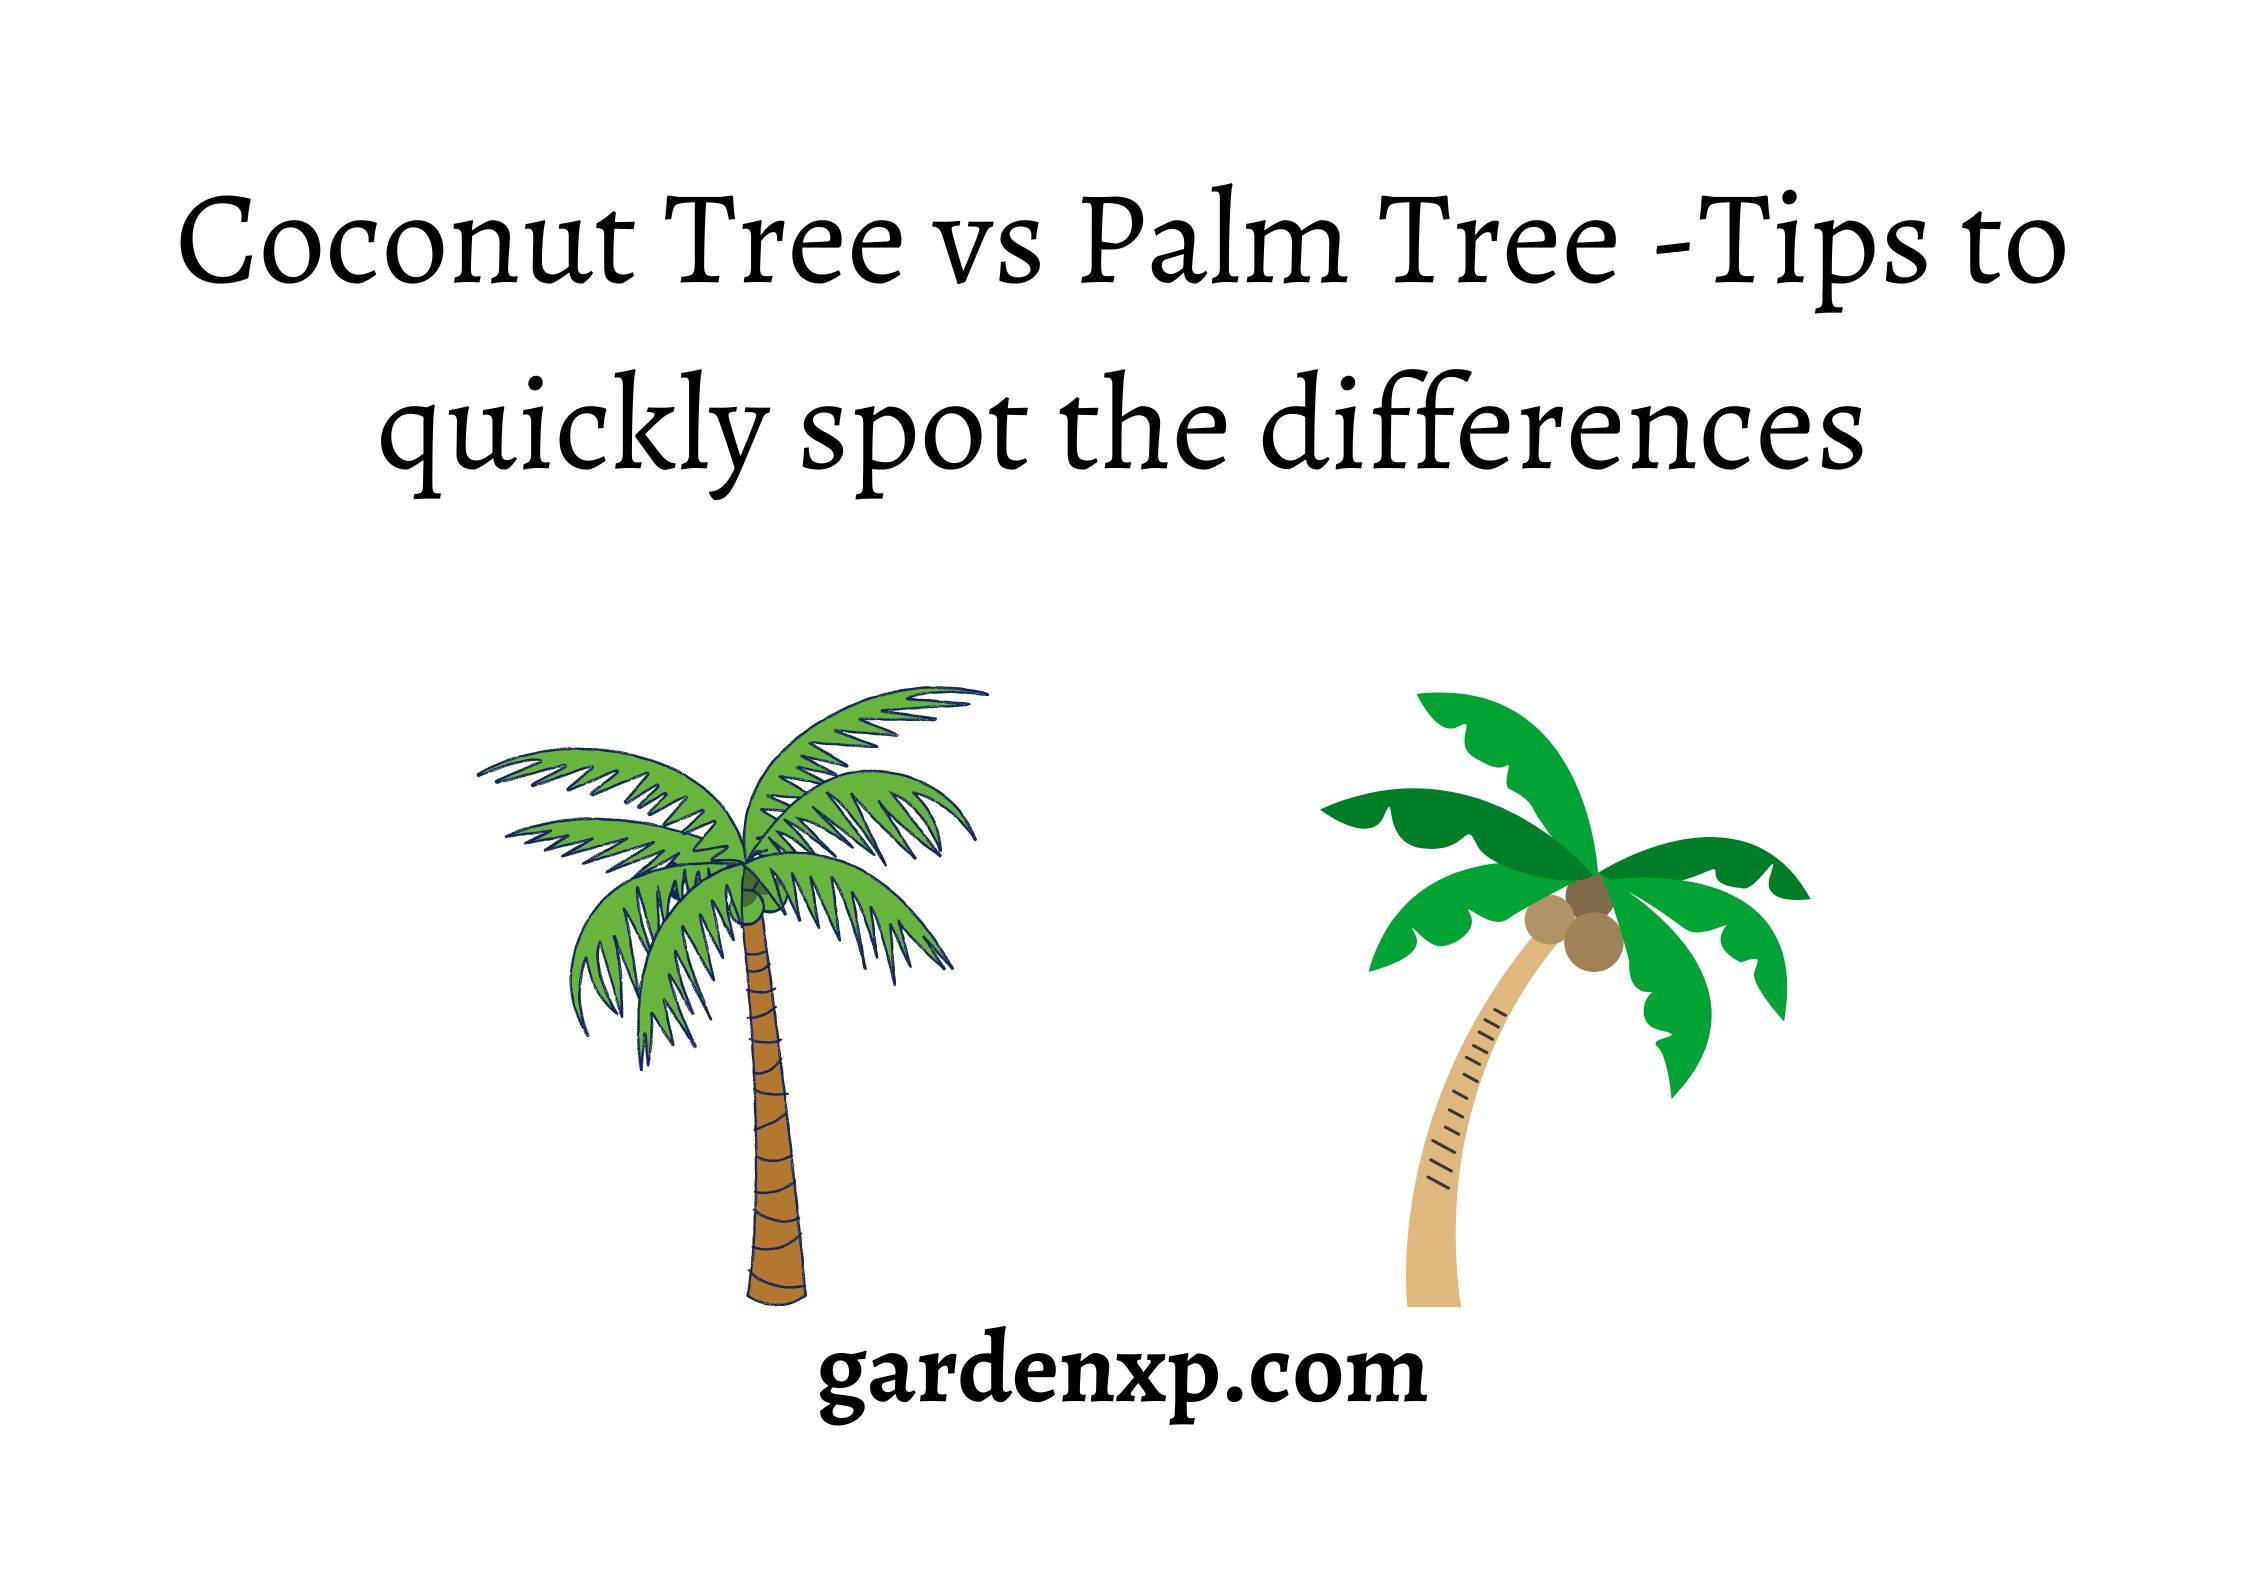 Coconut Tree vs Palm Tree -Tips to quickly spot the differences